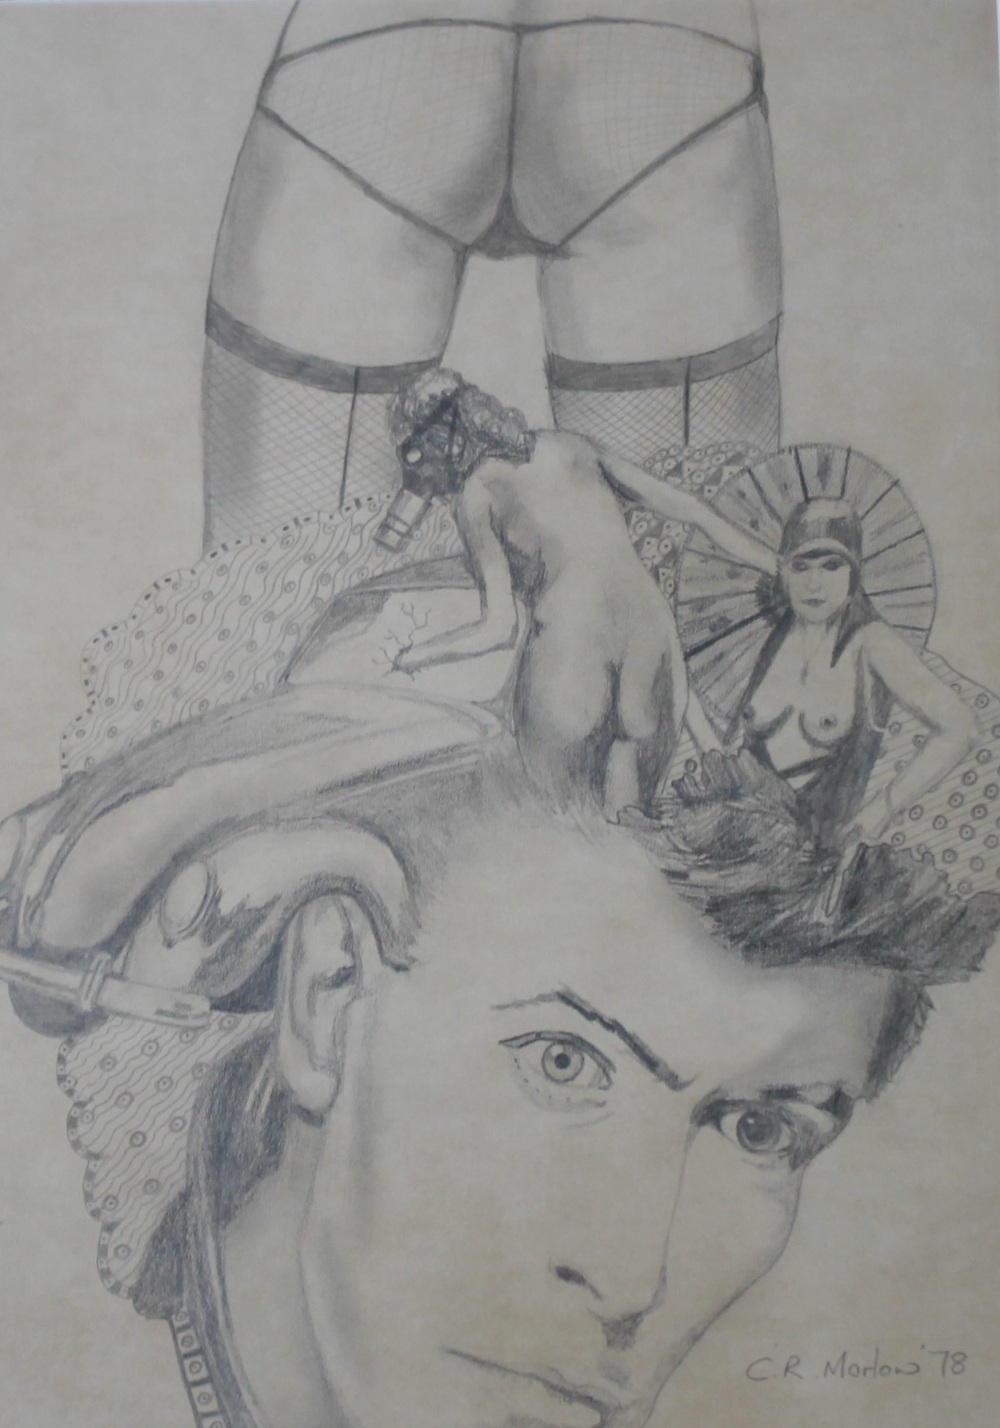 C. R. MORLOW. Figurative studies of David Bowie and three female nudes, signed and dated 1978